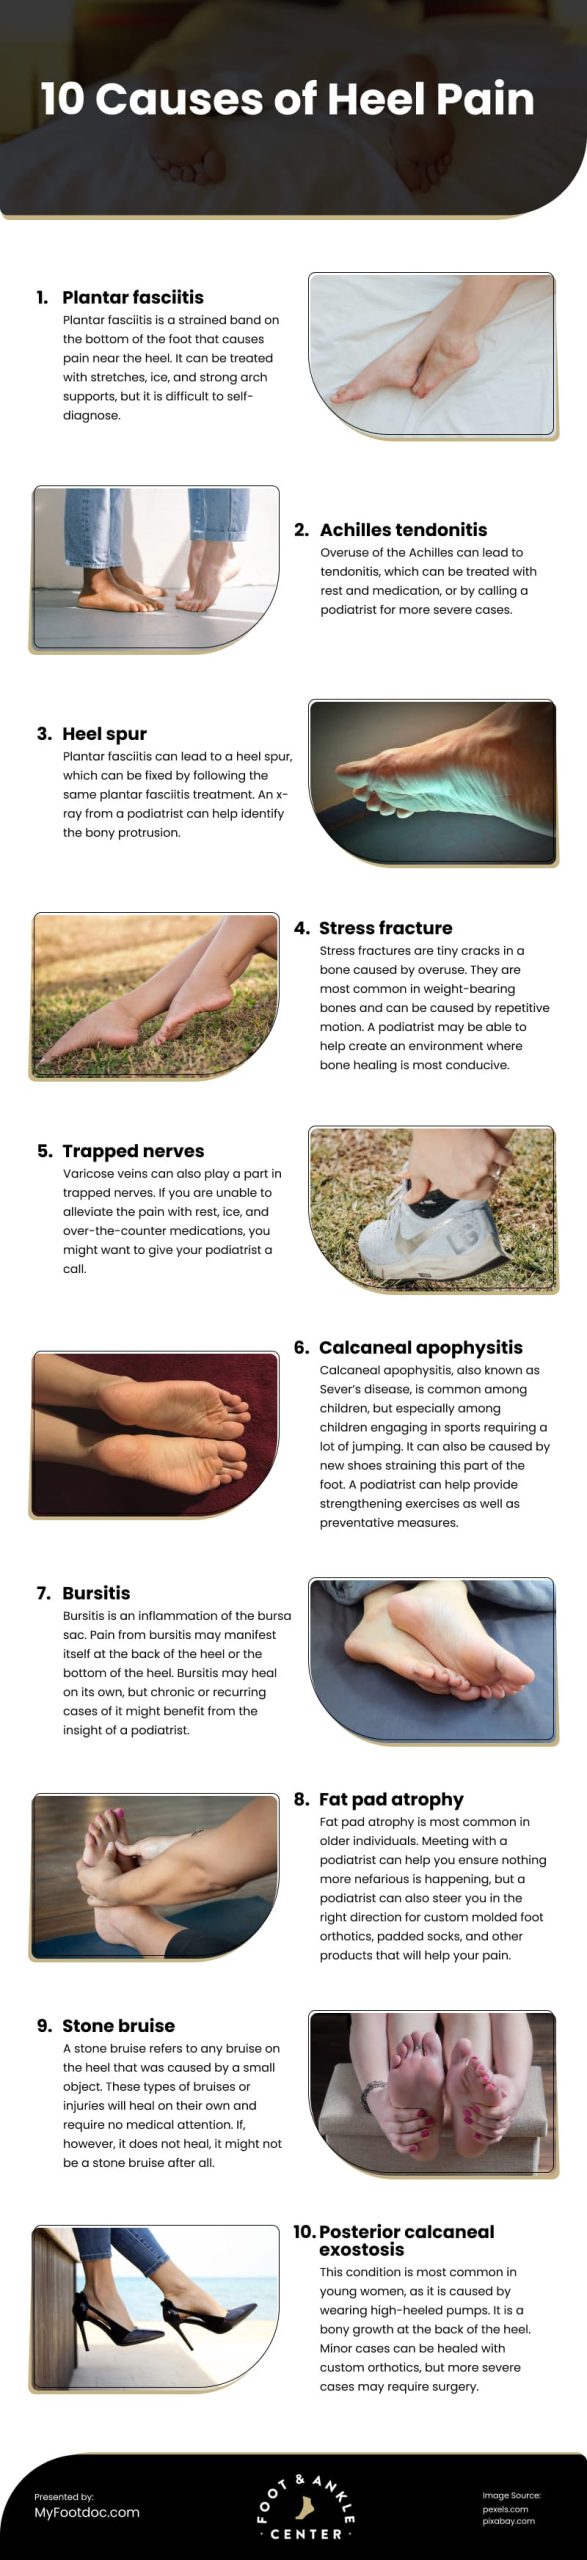 10 Causes of Heel Pain Infographic